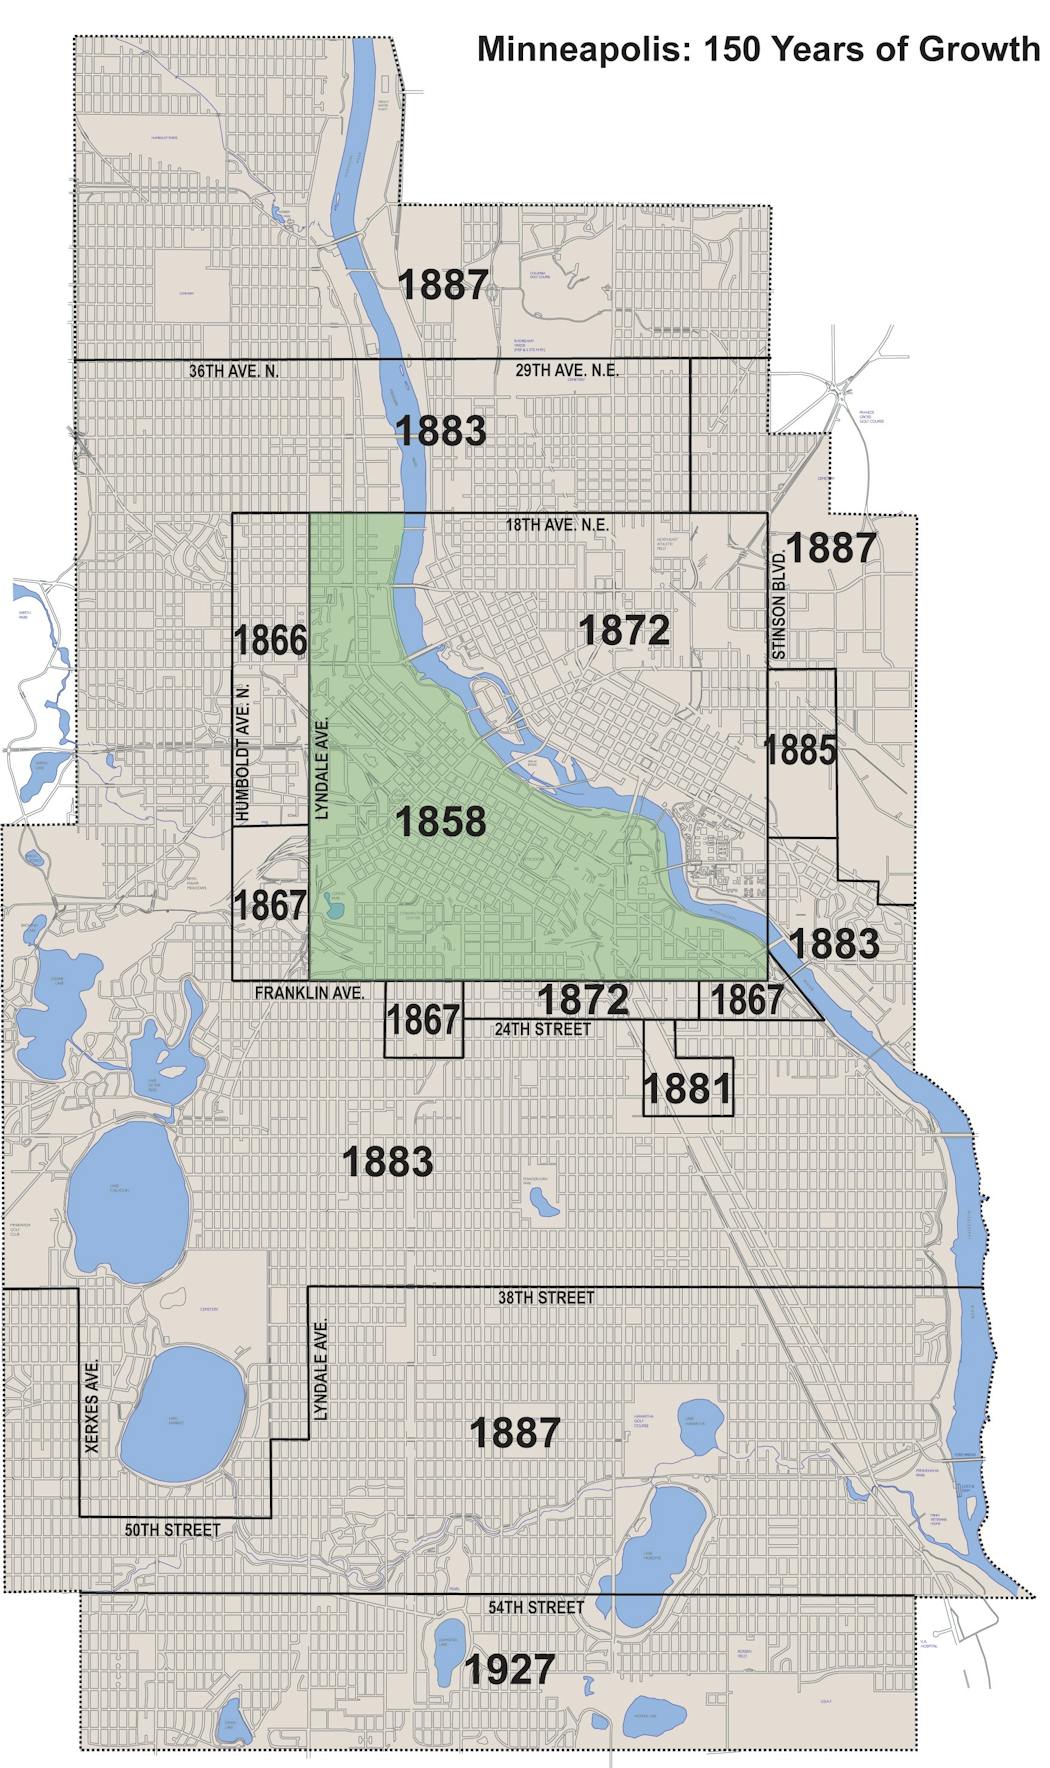 Minneapolis expanded its boundaries numerous times between the 1860s and 1880s, followed by a 40-year hiatus.